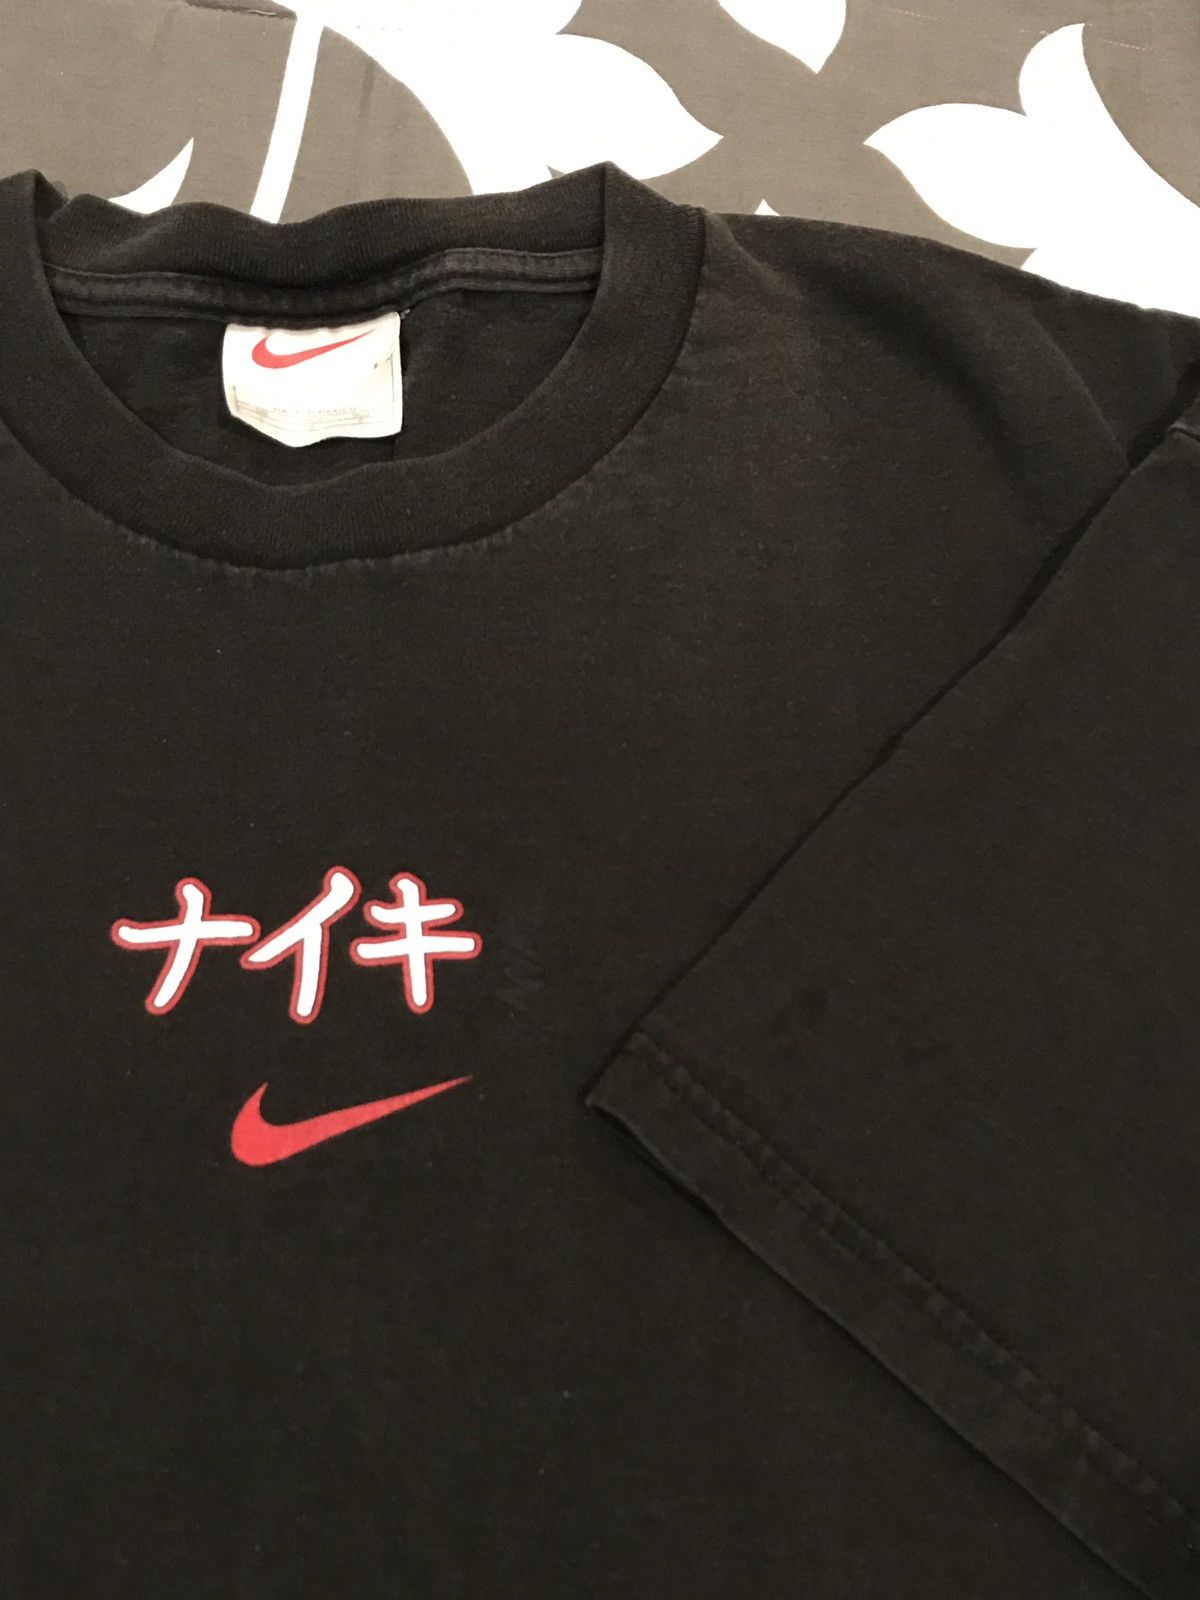 Nike Vintage Nike Japanese letters tee size L Size US L / EU 52-54 / 3 - 2 Preview